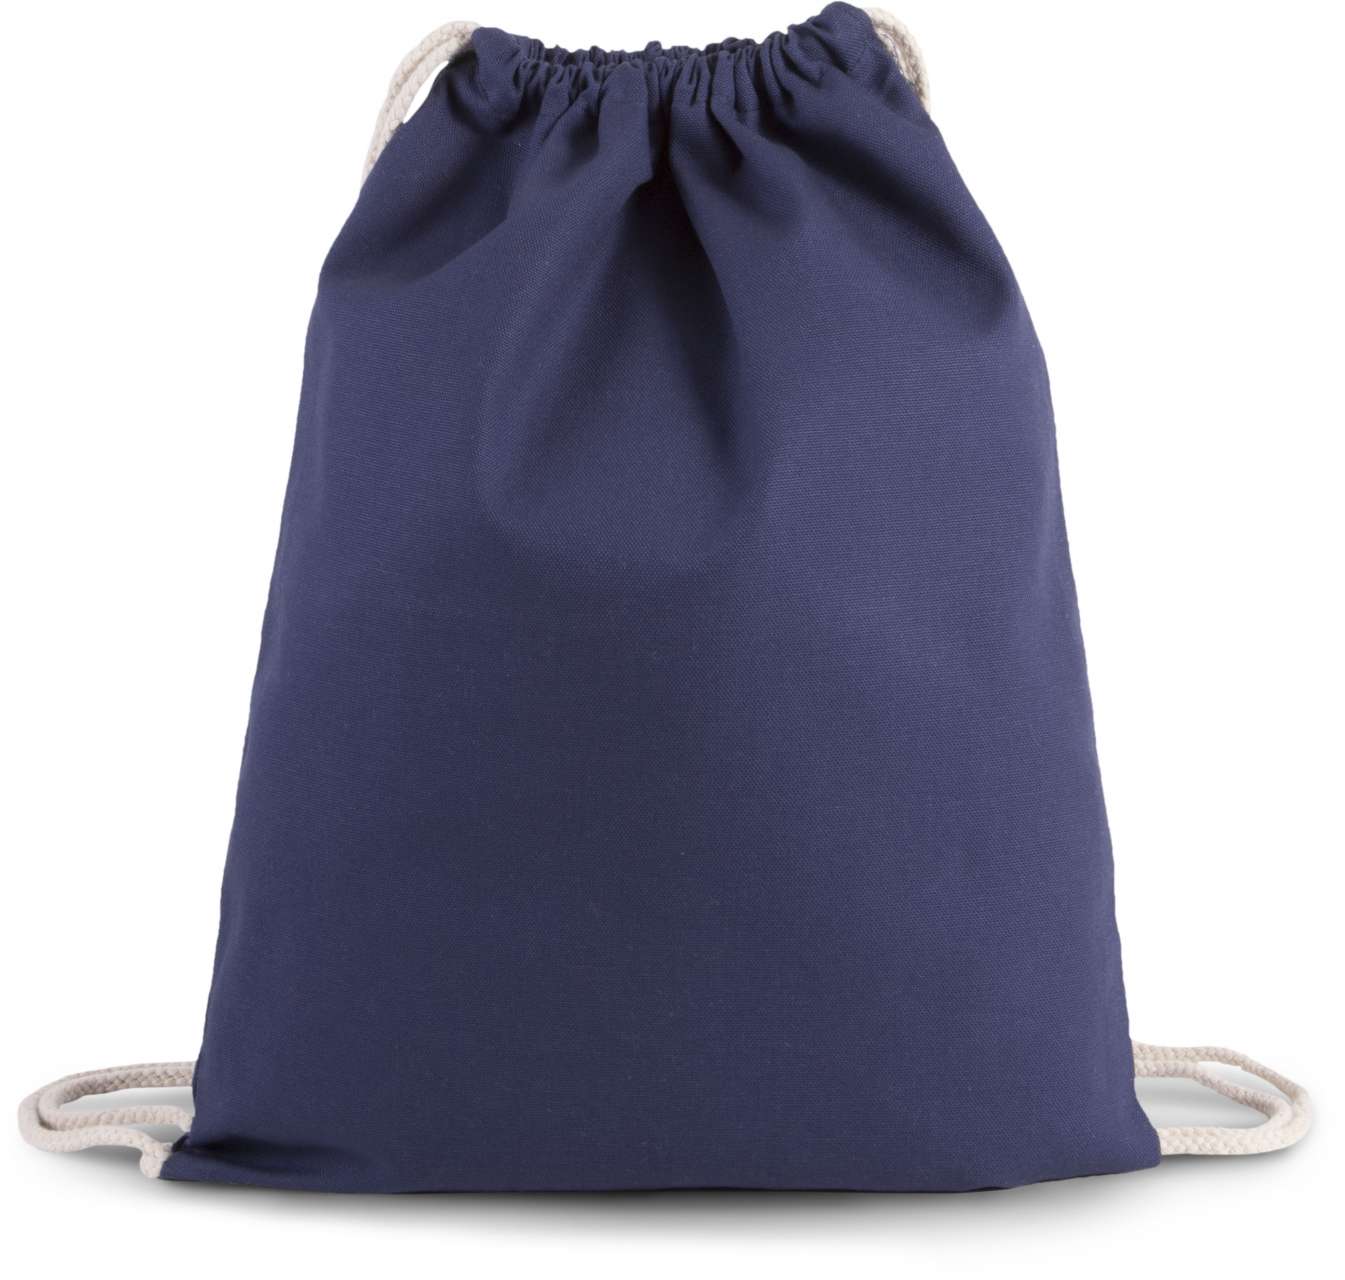 Promo  DRAWSTRING BAG WITH THICK STRAPS